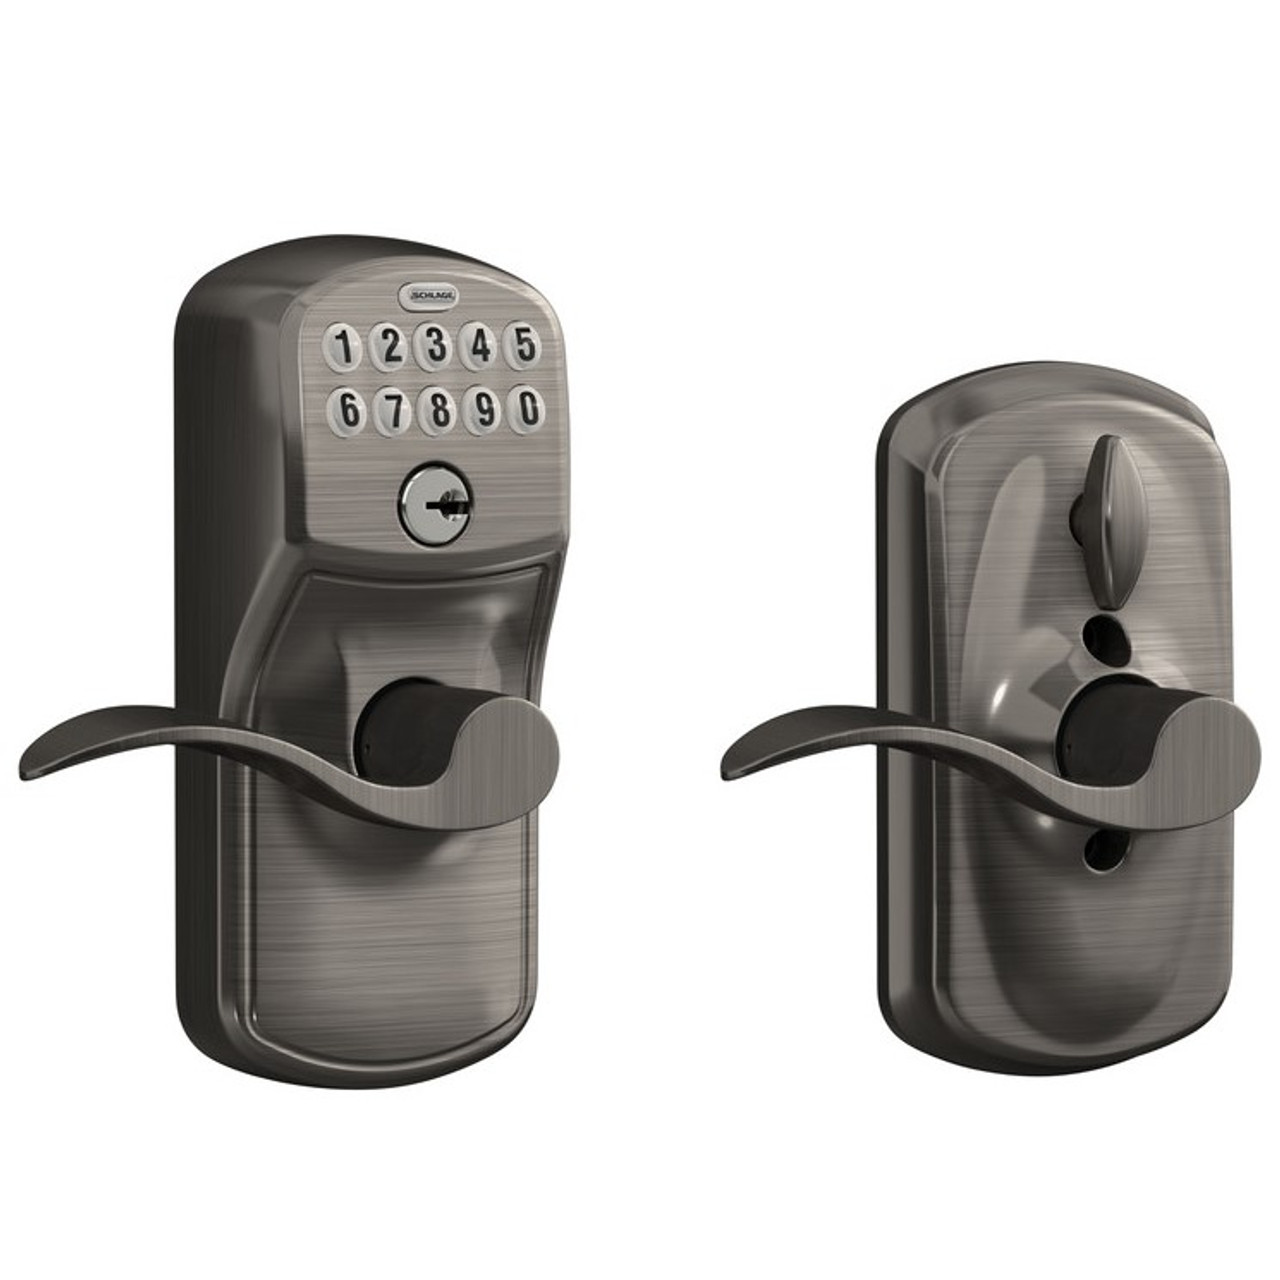 Schlage FE595 Keypad Entry with Flex-Lock Plymouth Housing Accent Lever